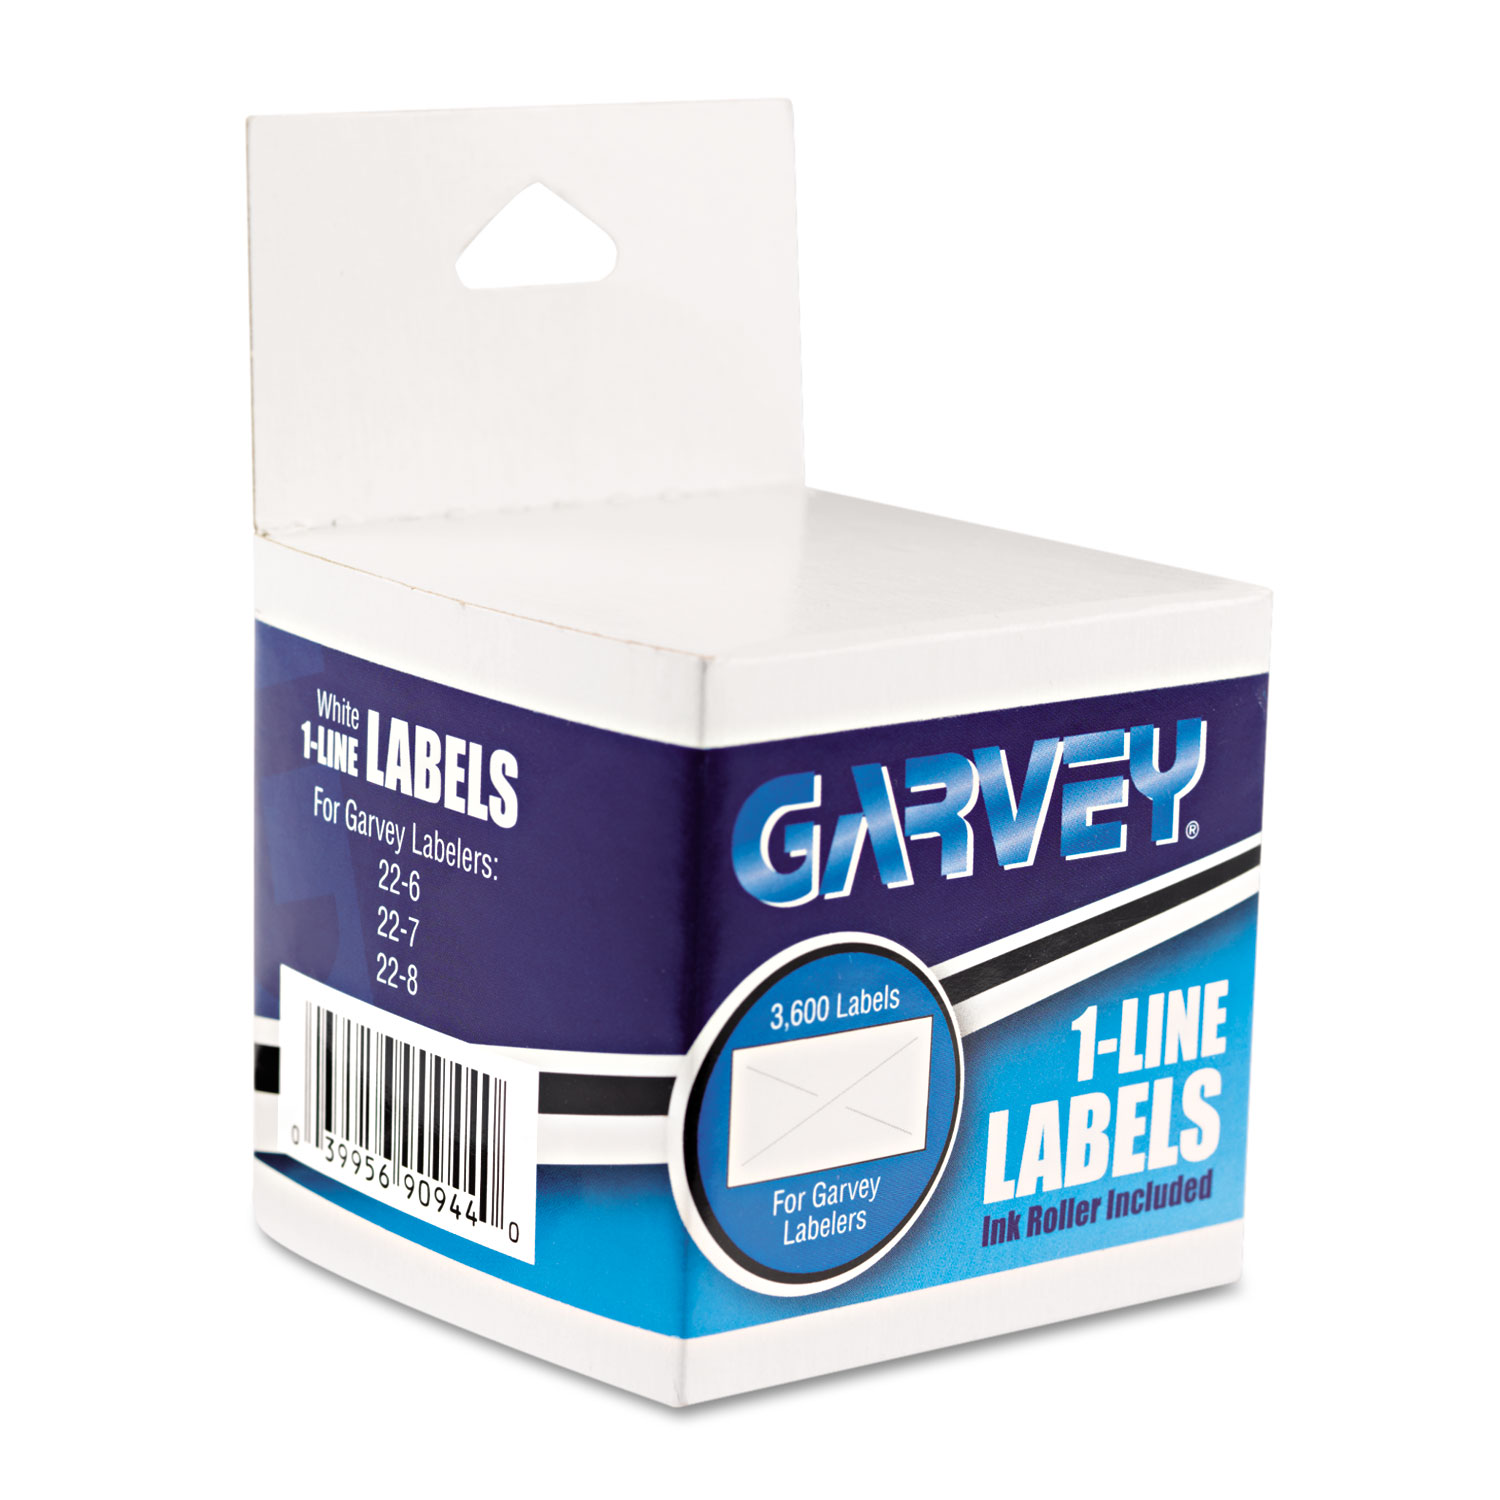 One-Line Pricemarker Labels, 7/16 x 13/16, White, 1200/Roll, 3 Rolls/Box